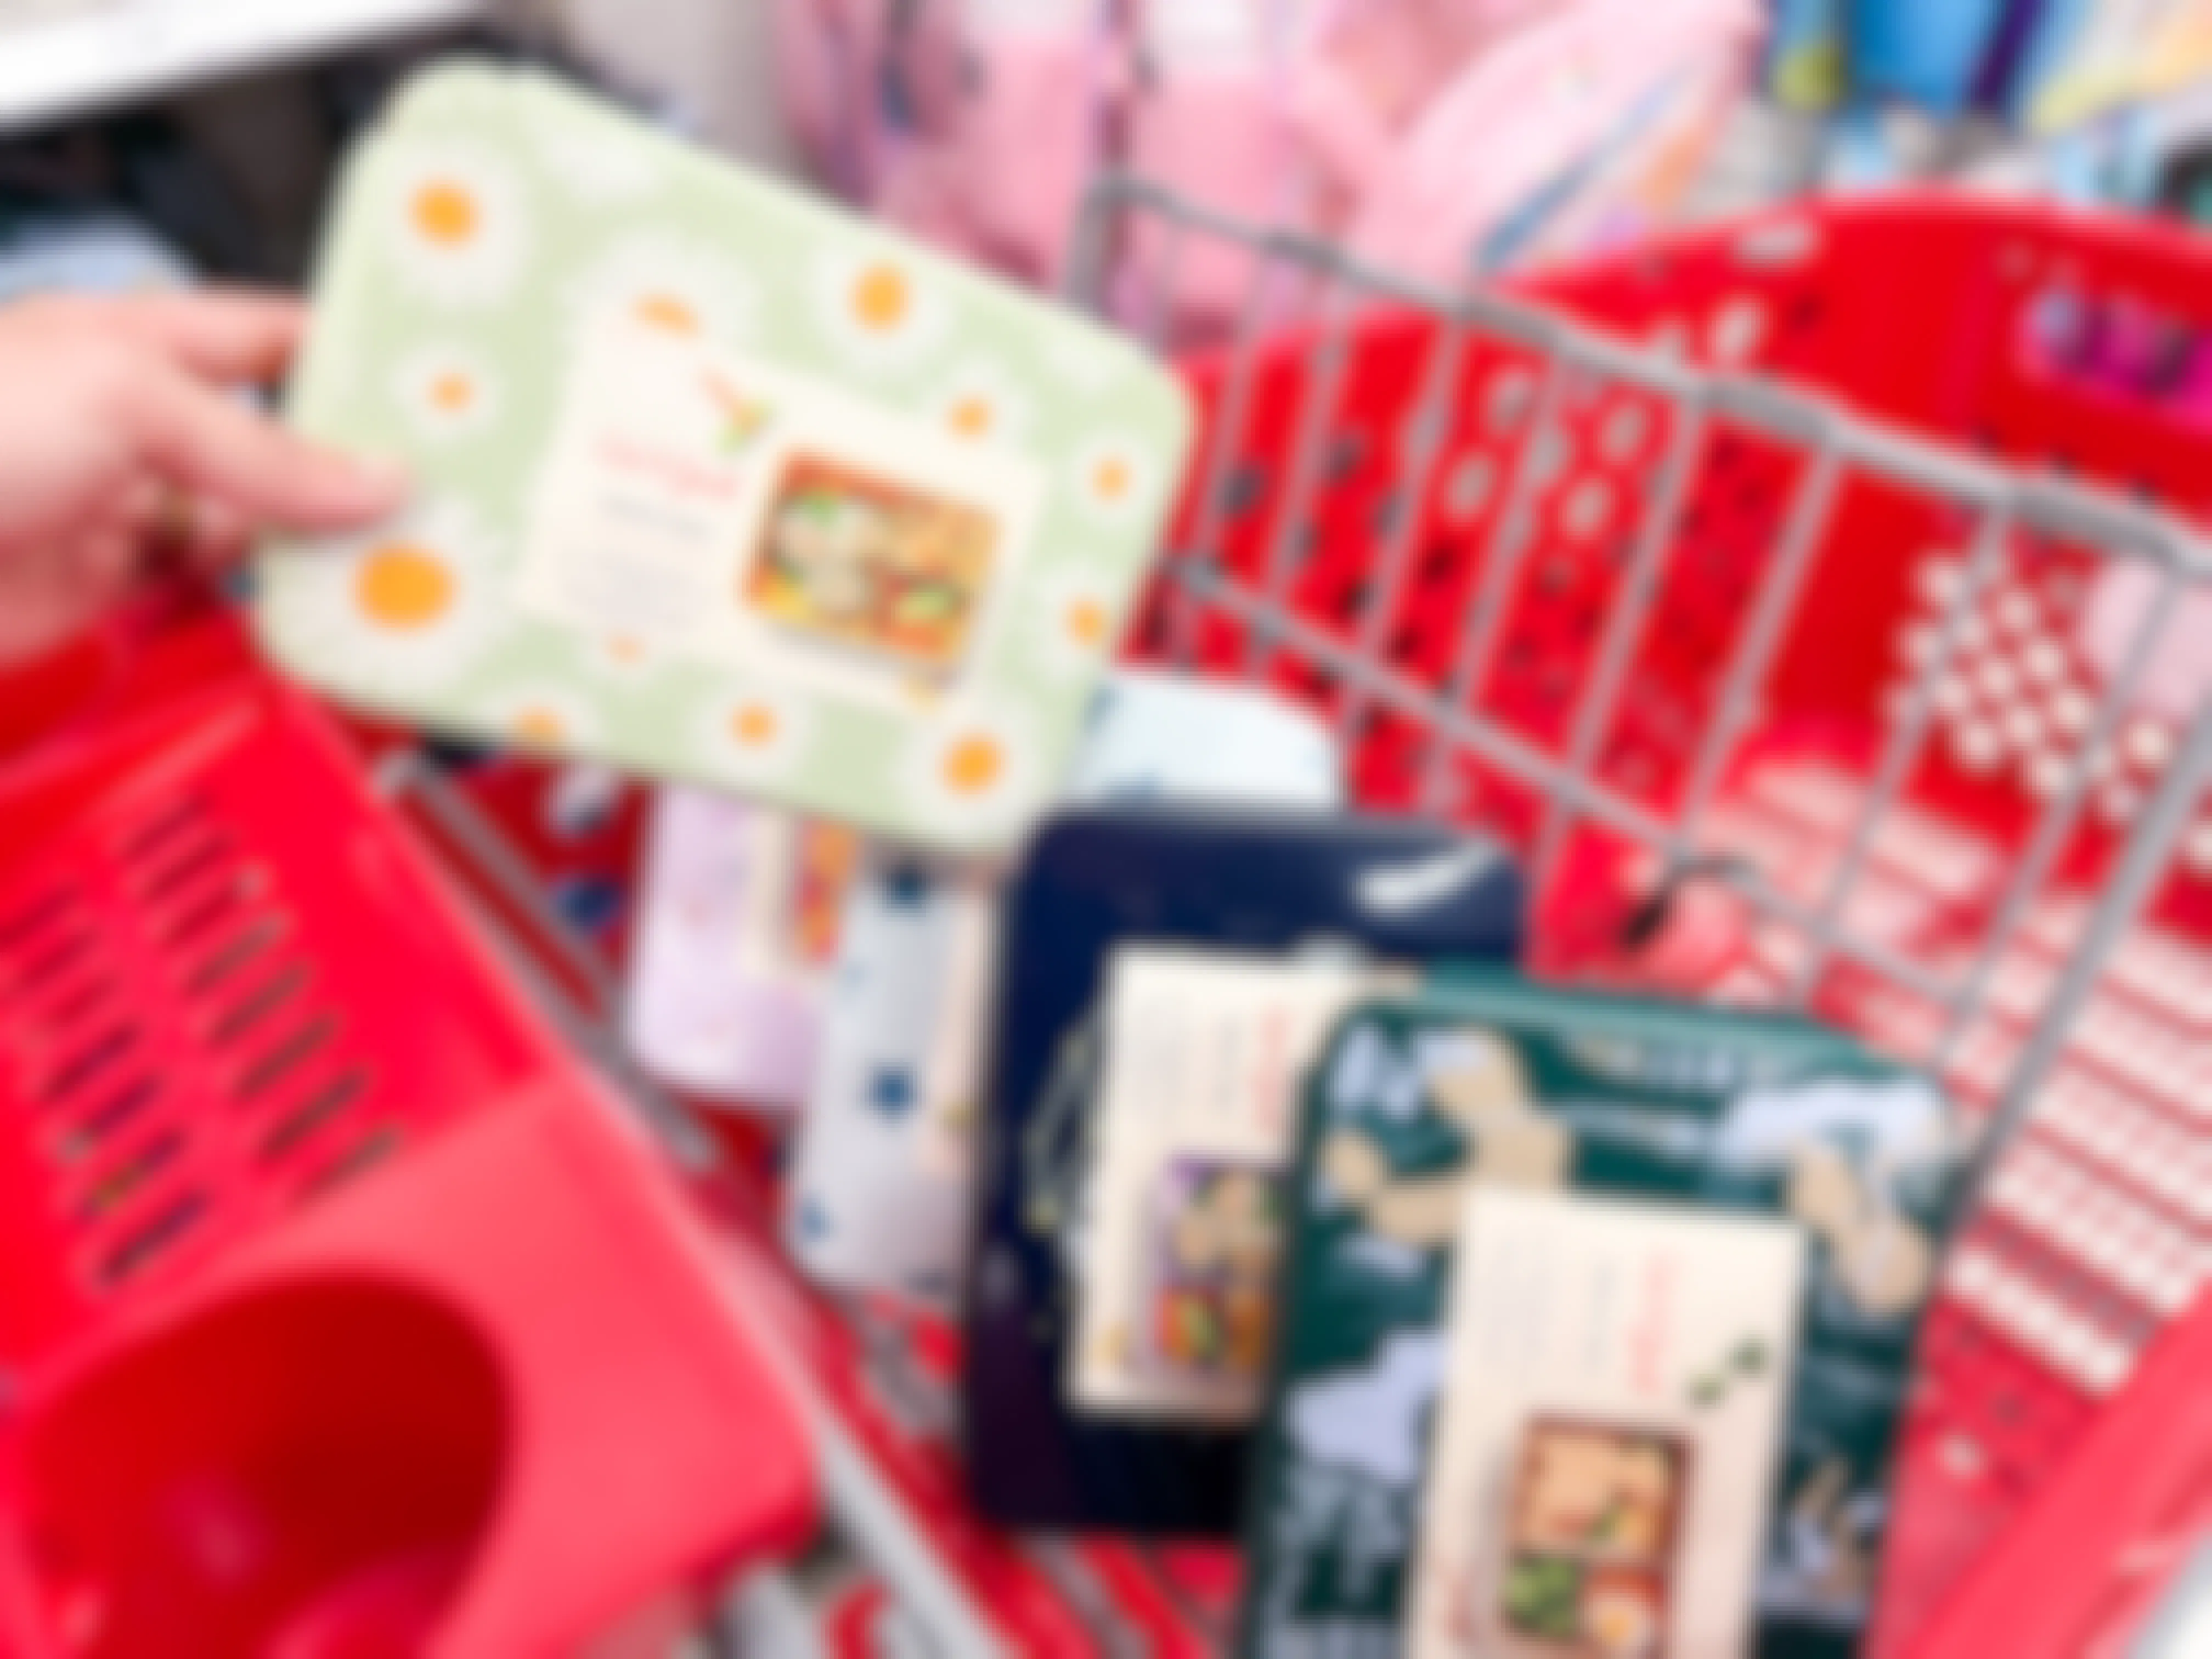 a woman's hand putting a target cat and jack bento box with daisies on it into her shopping cart with three other bento boxes in the cart already